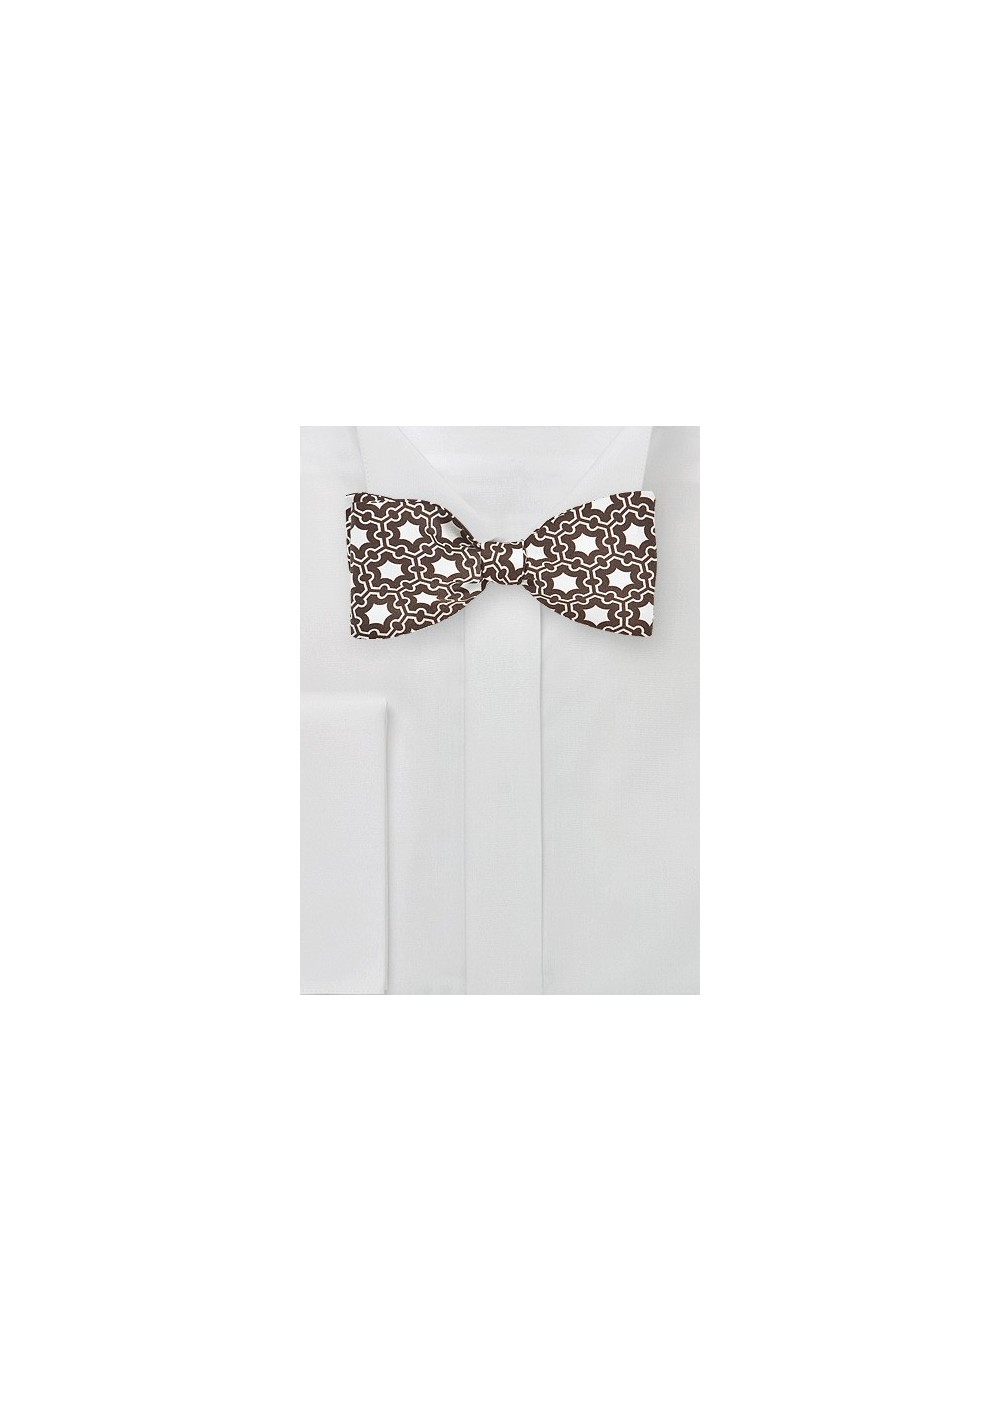 Modern Moroccan Print Bow Tie in Brown and White